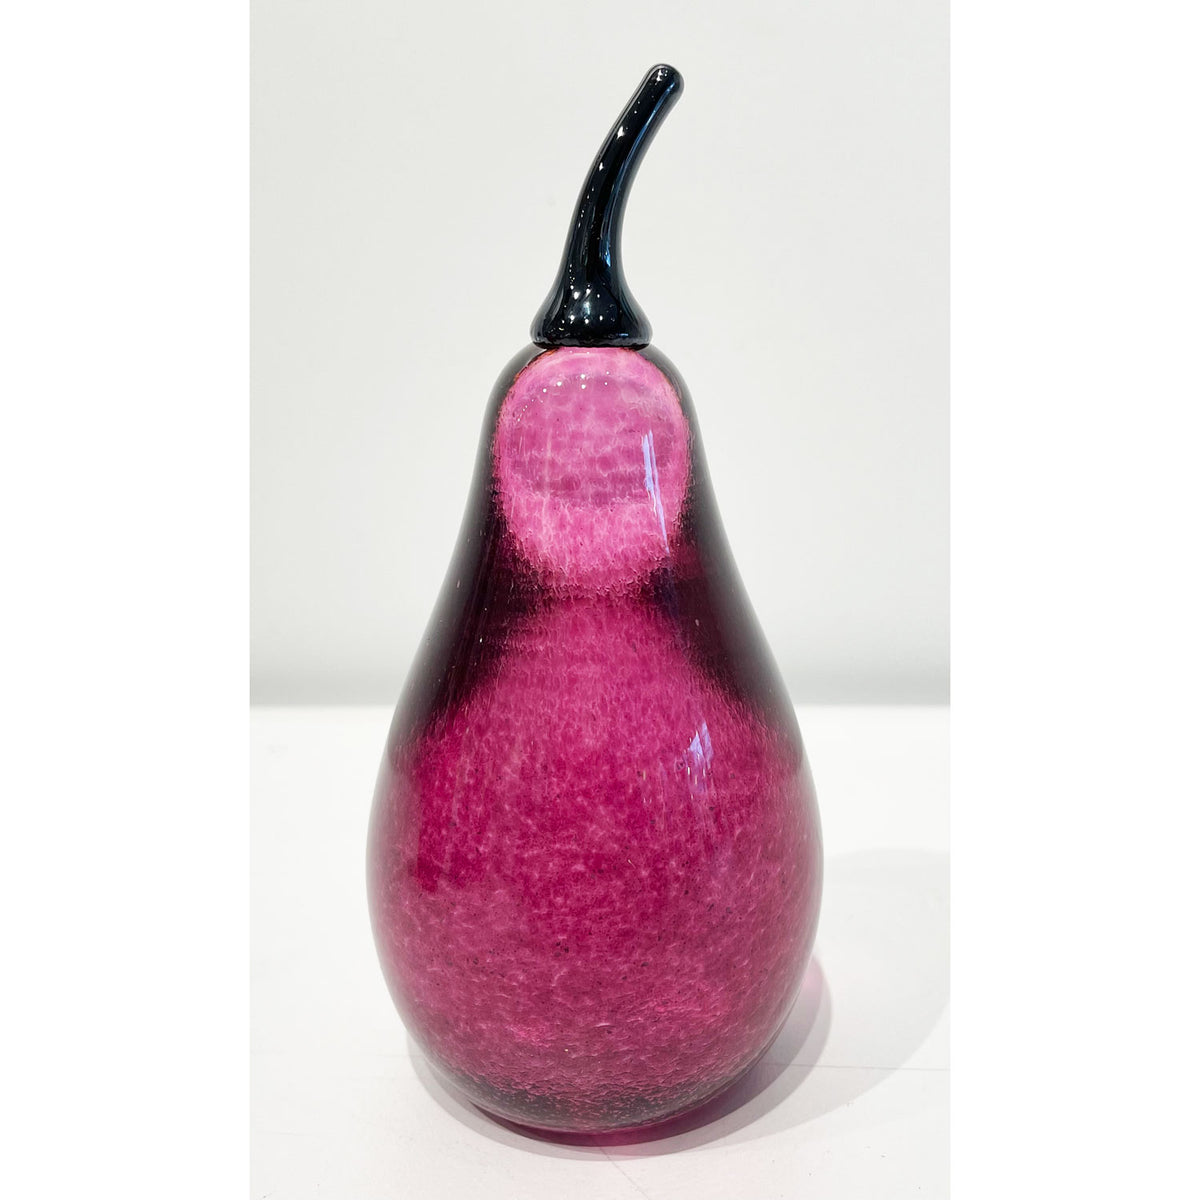 Mark Armstrong - Violet Pear, 5.5"